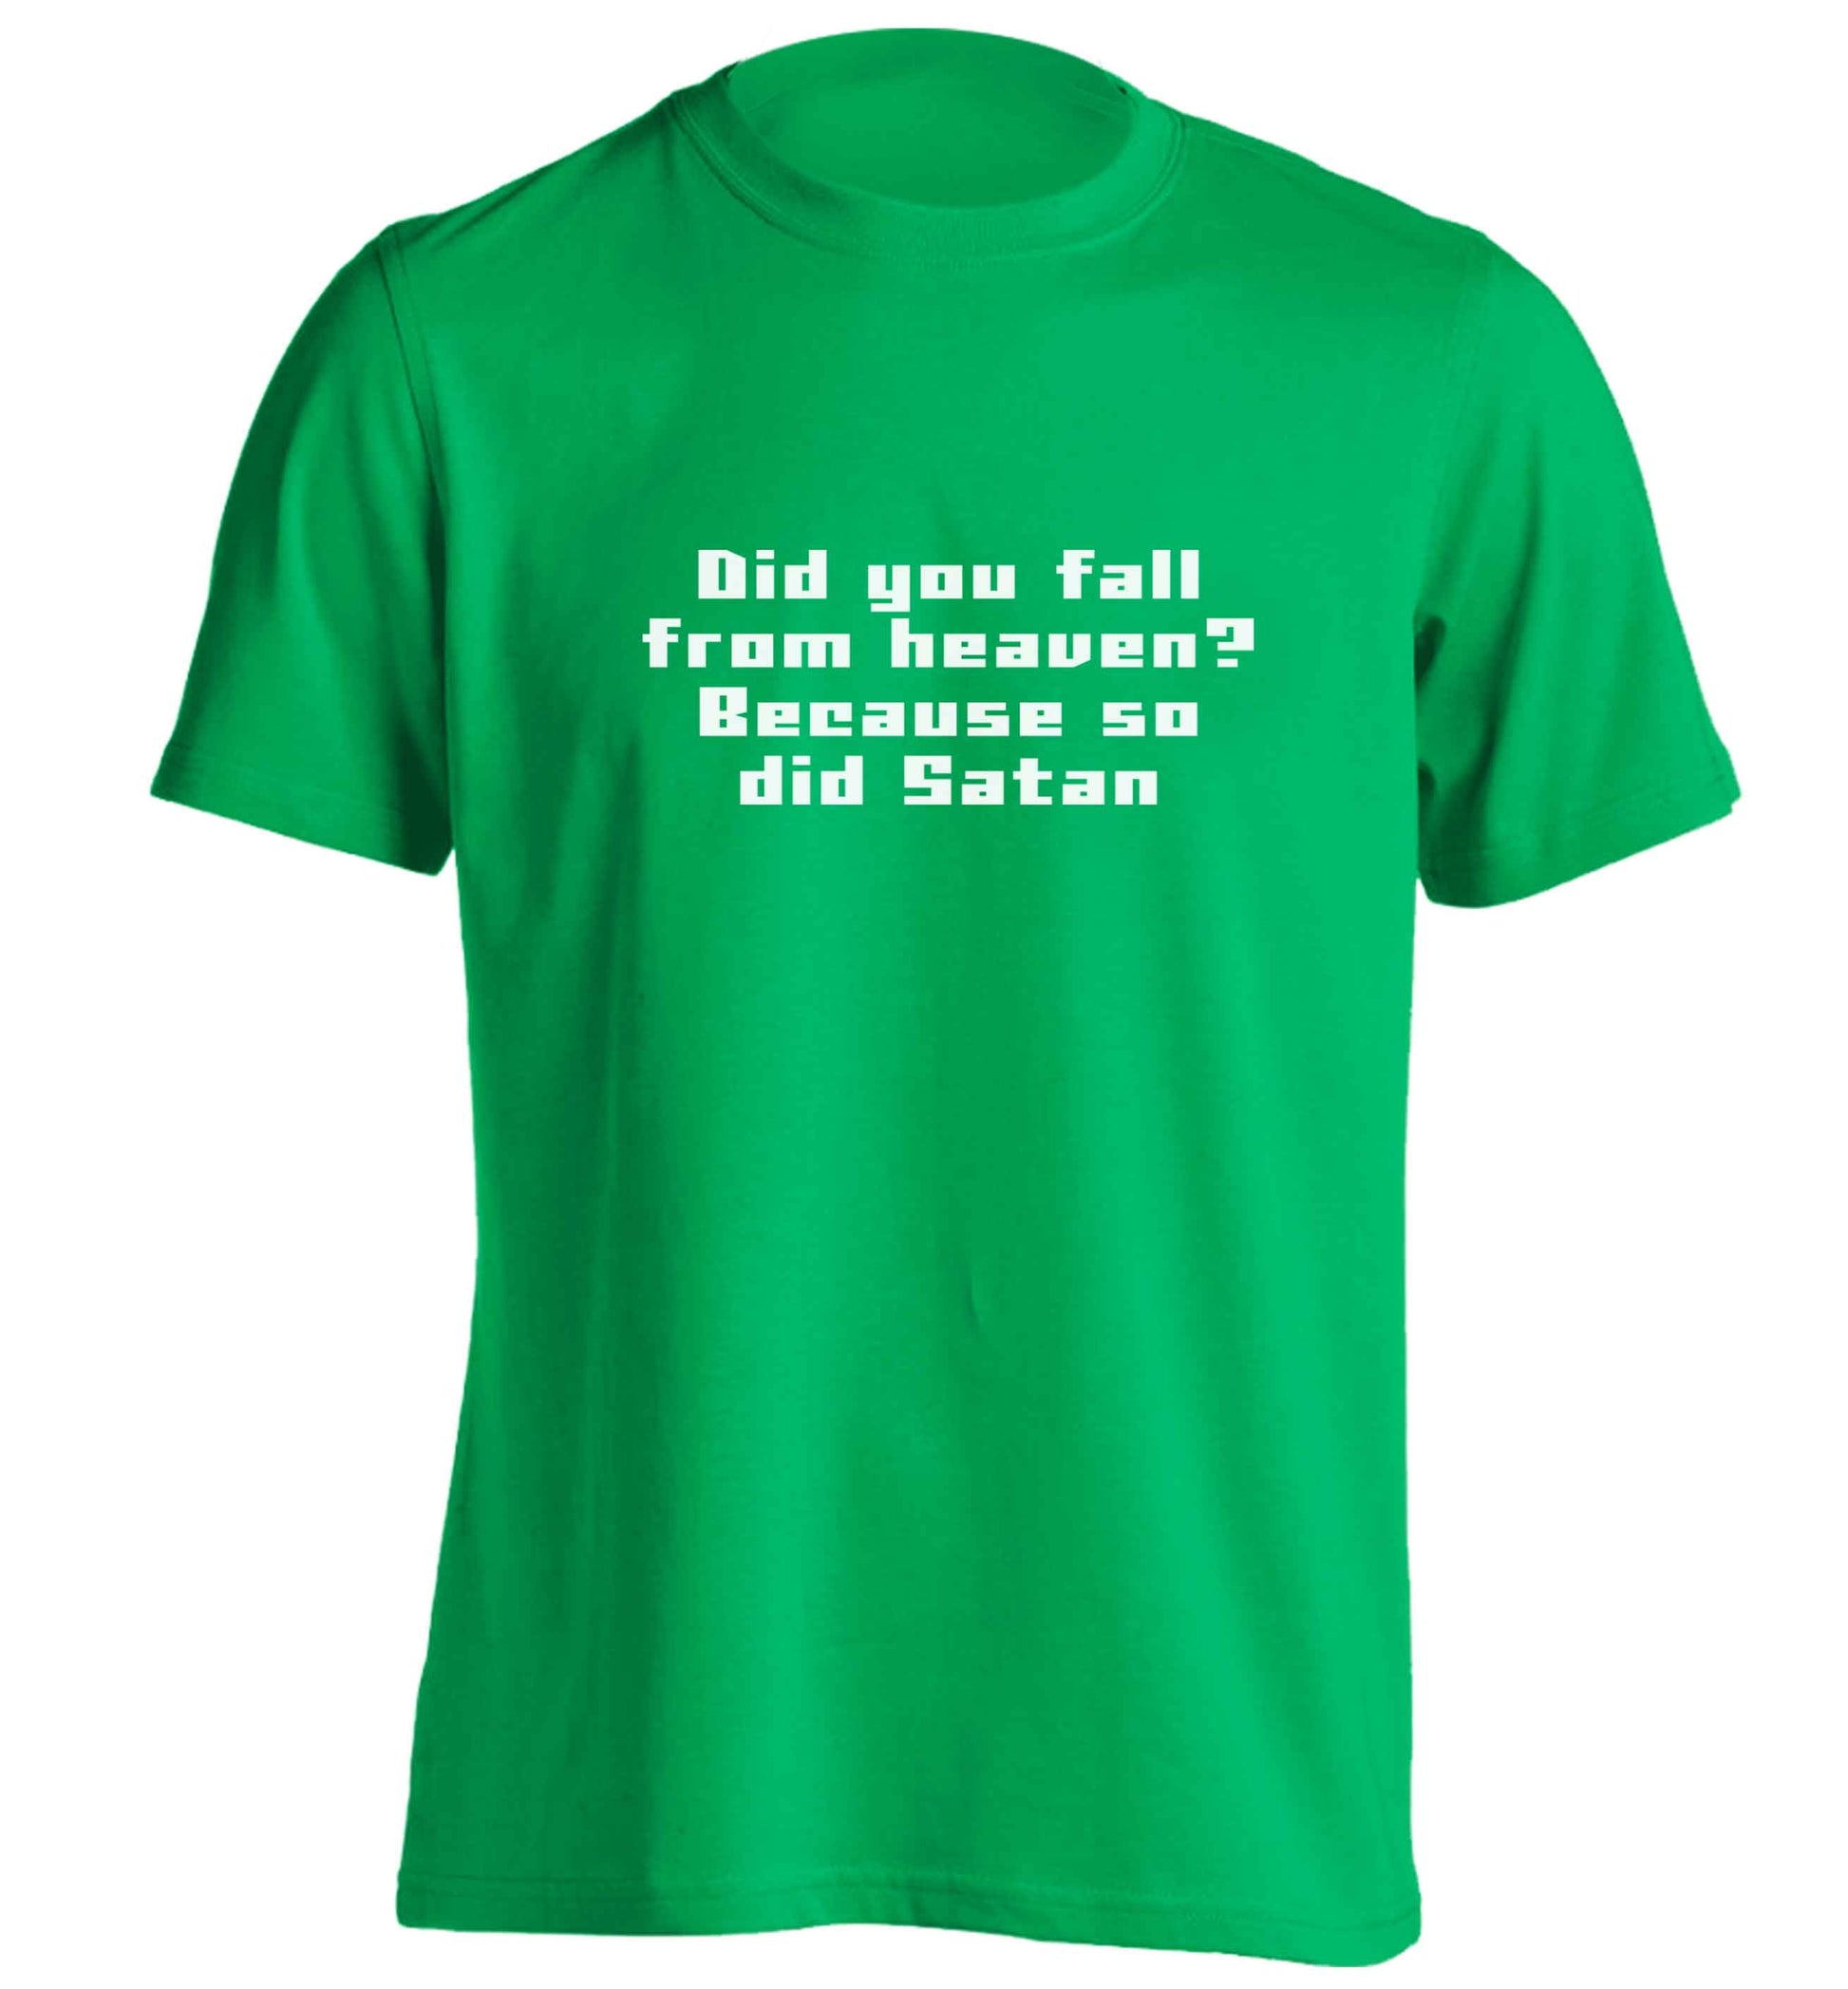 Did you fall from Heaven because so did Satan adults unisex green Tshirt 2XL